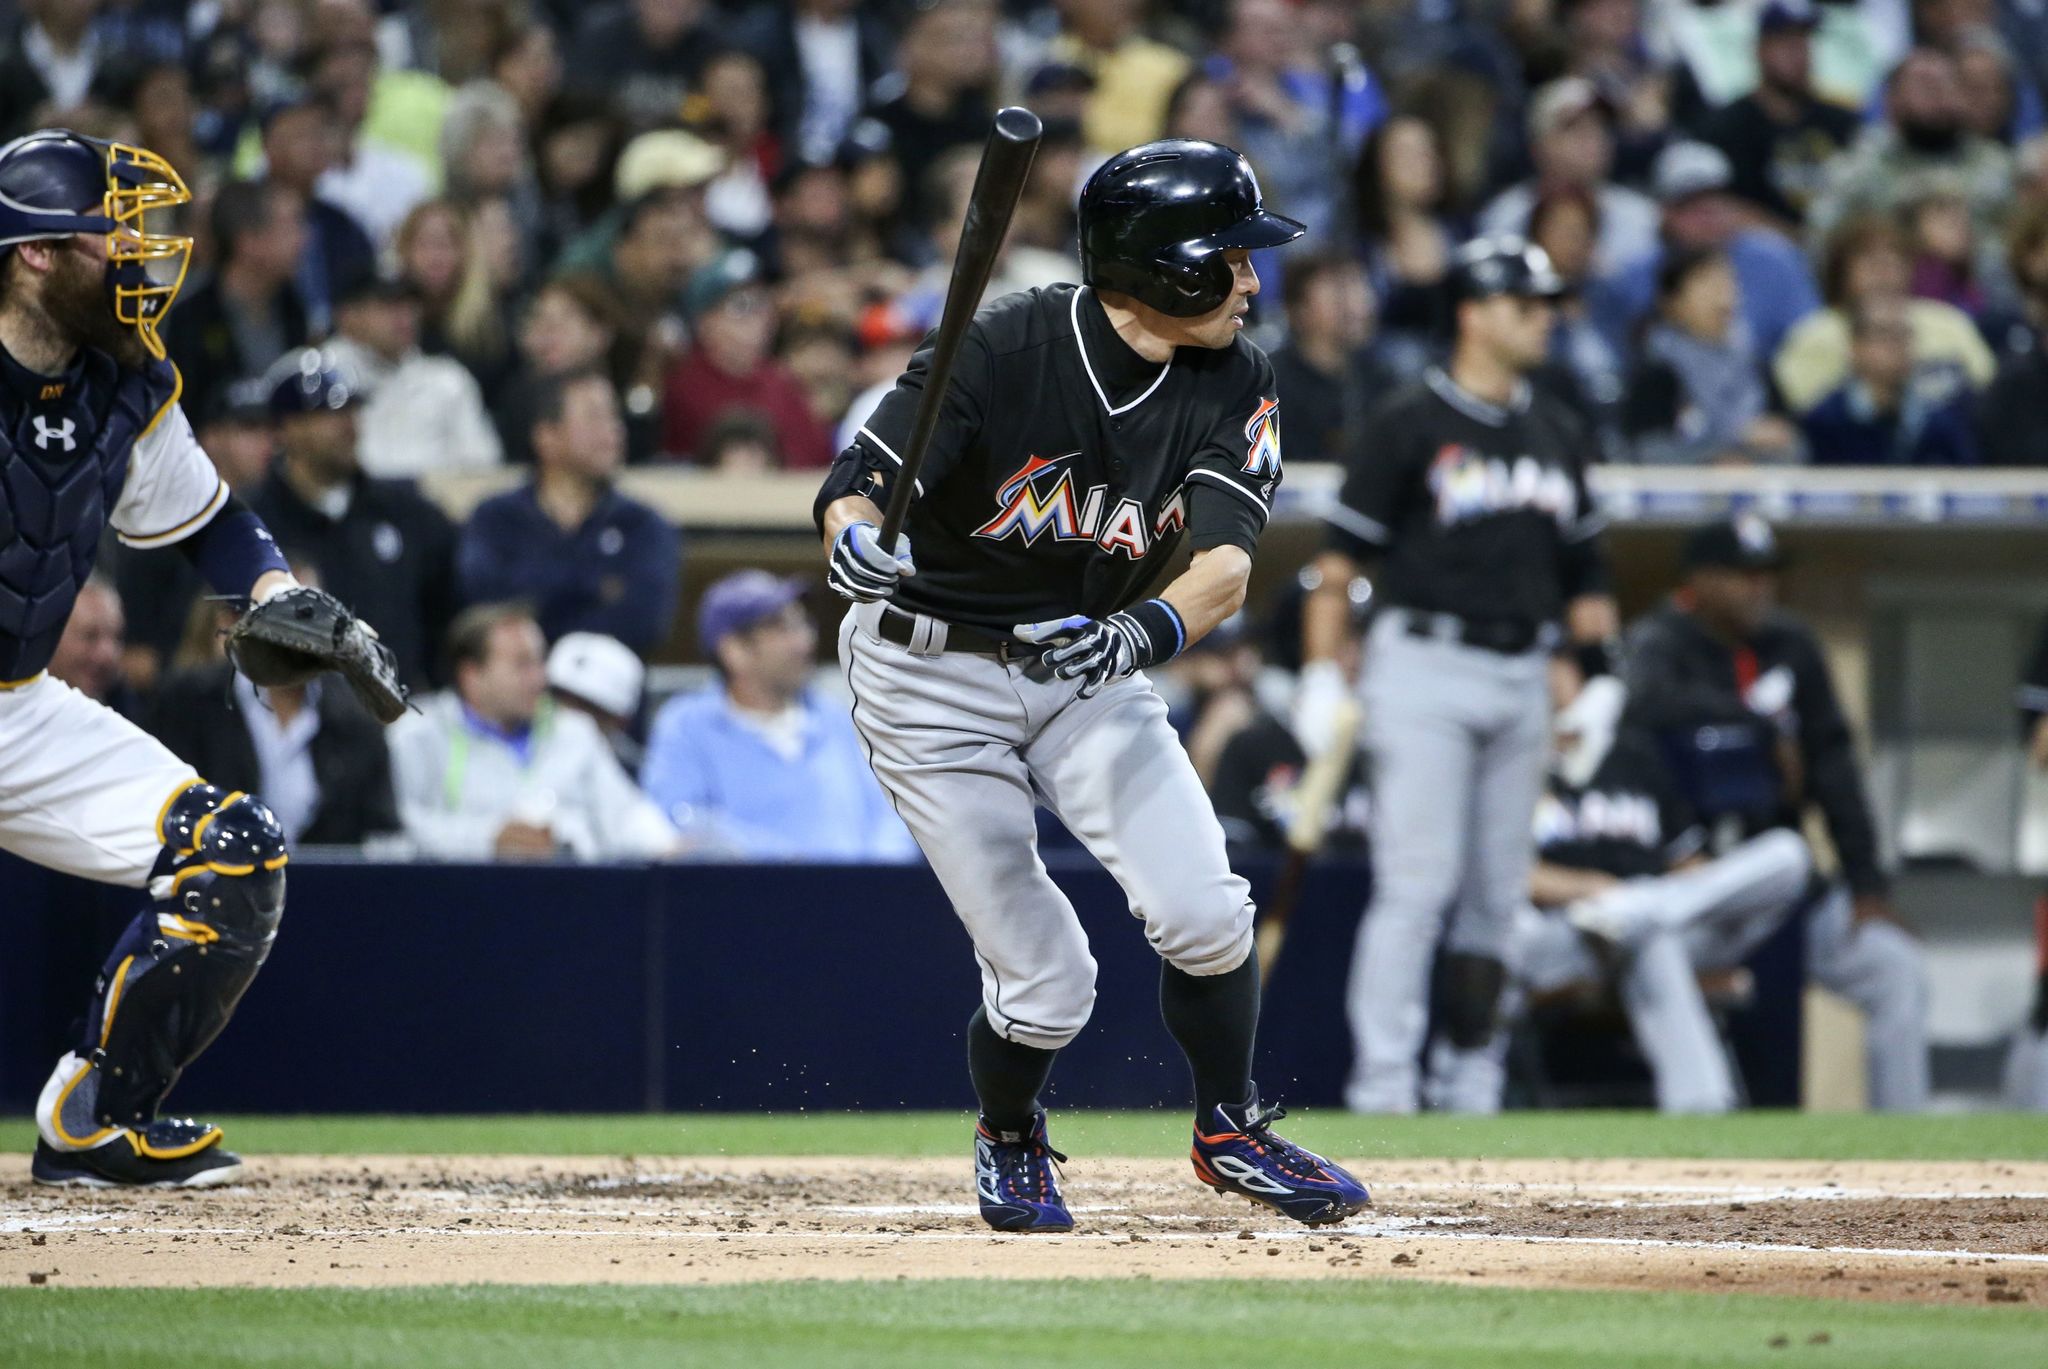 Ichiro Suzuki of the Miami Marlins watches his line drive fall in for a base hit during Monday night’s game against the San Diego Padres. Suzuki had three hits in the game to raise his season average to .350.